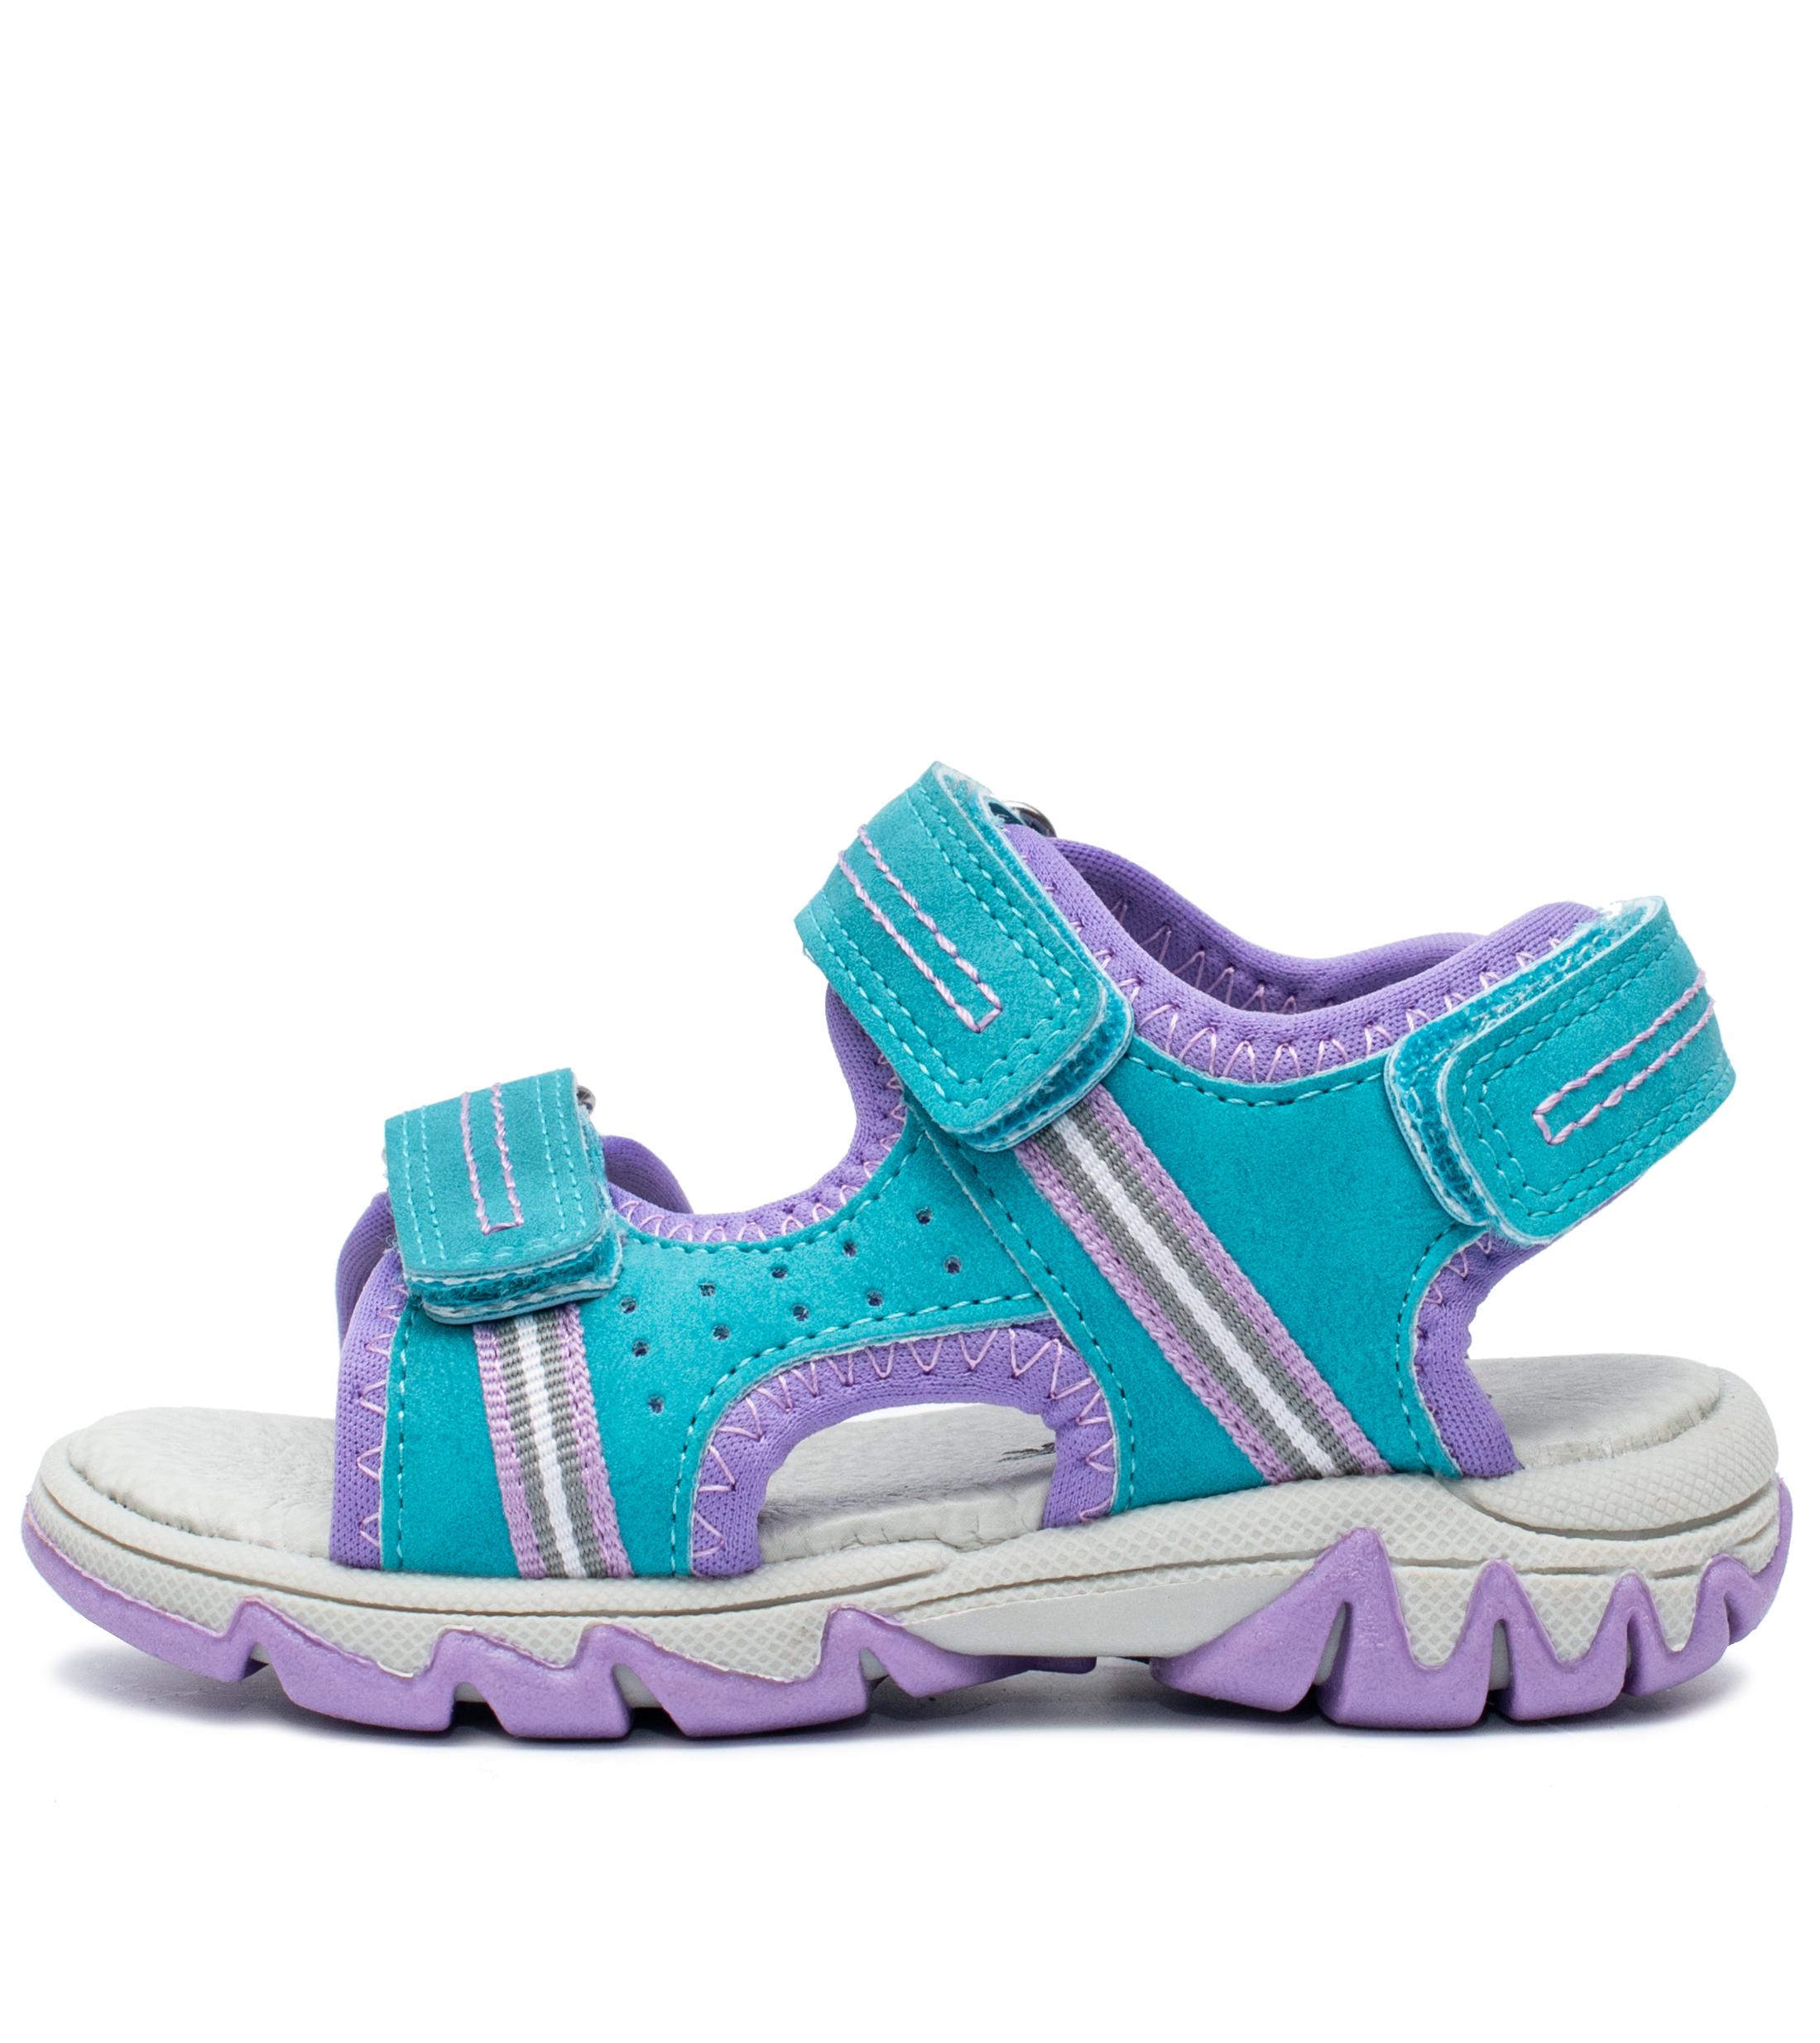 KUIPER KIDS & TEENS shoes for kids and teens - Sandals shoes